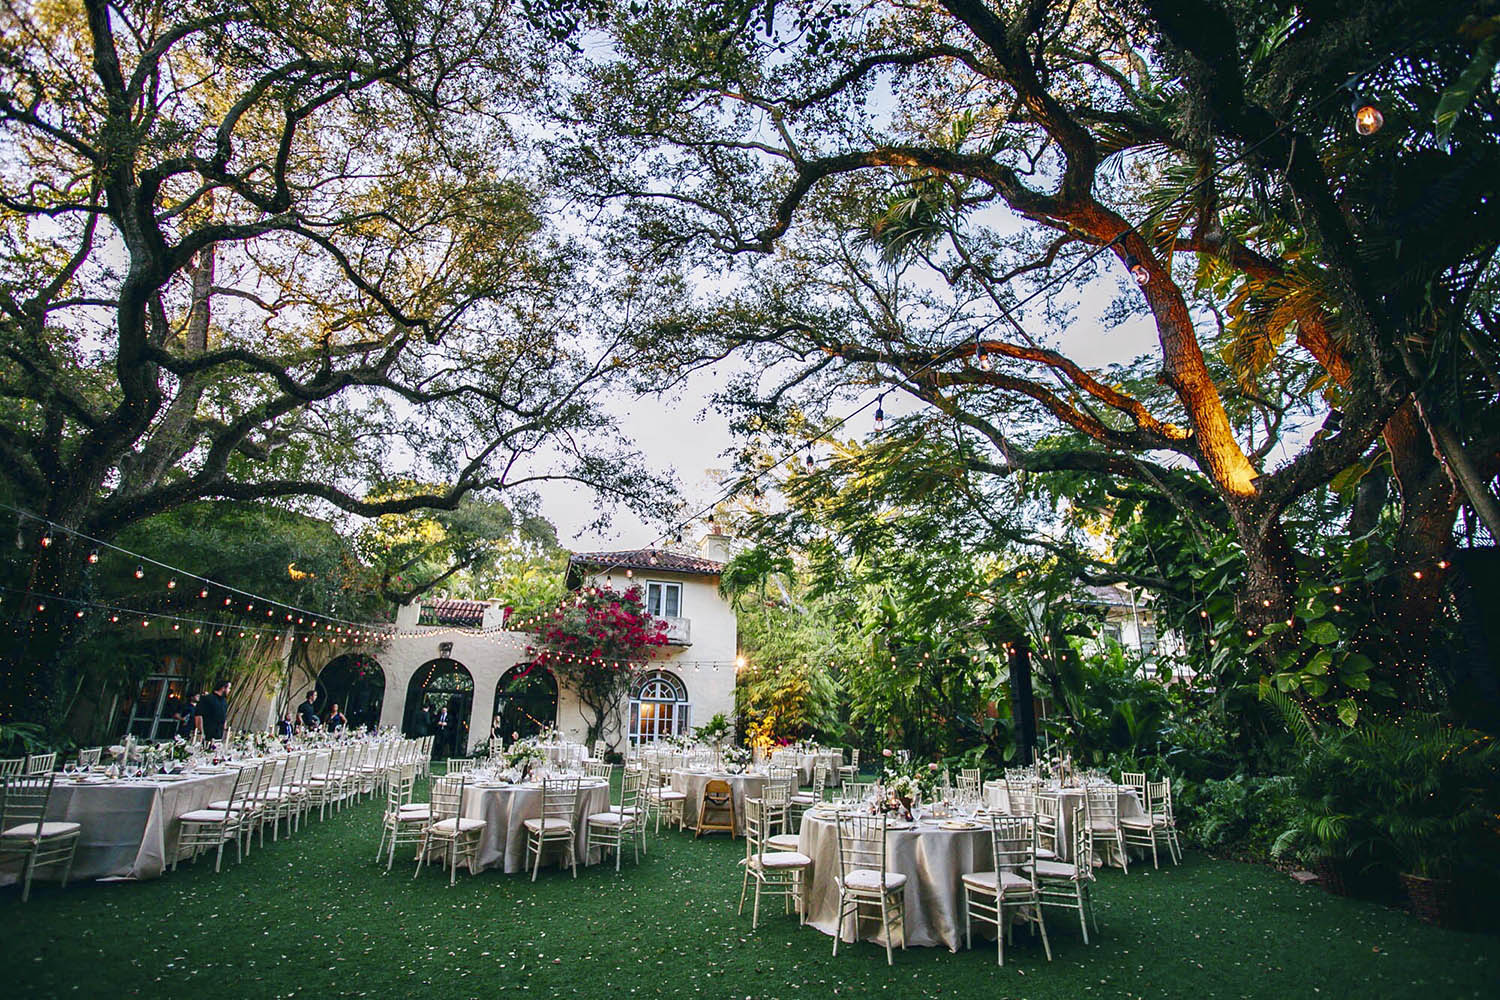 Image Of 5 Foolproof Things You Need to Know Before Searching for a Venue